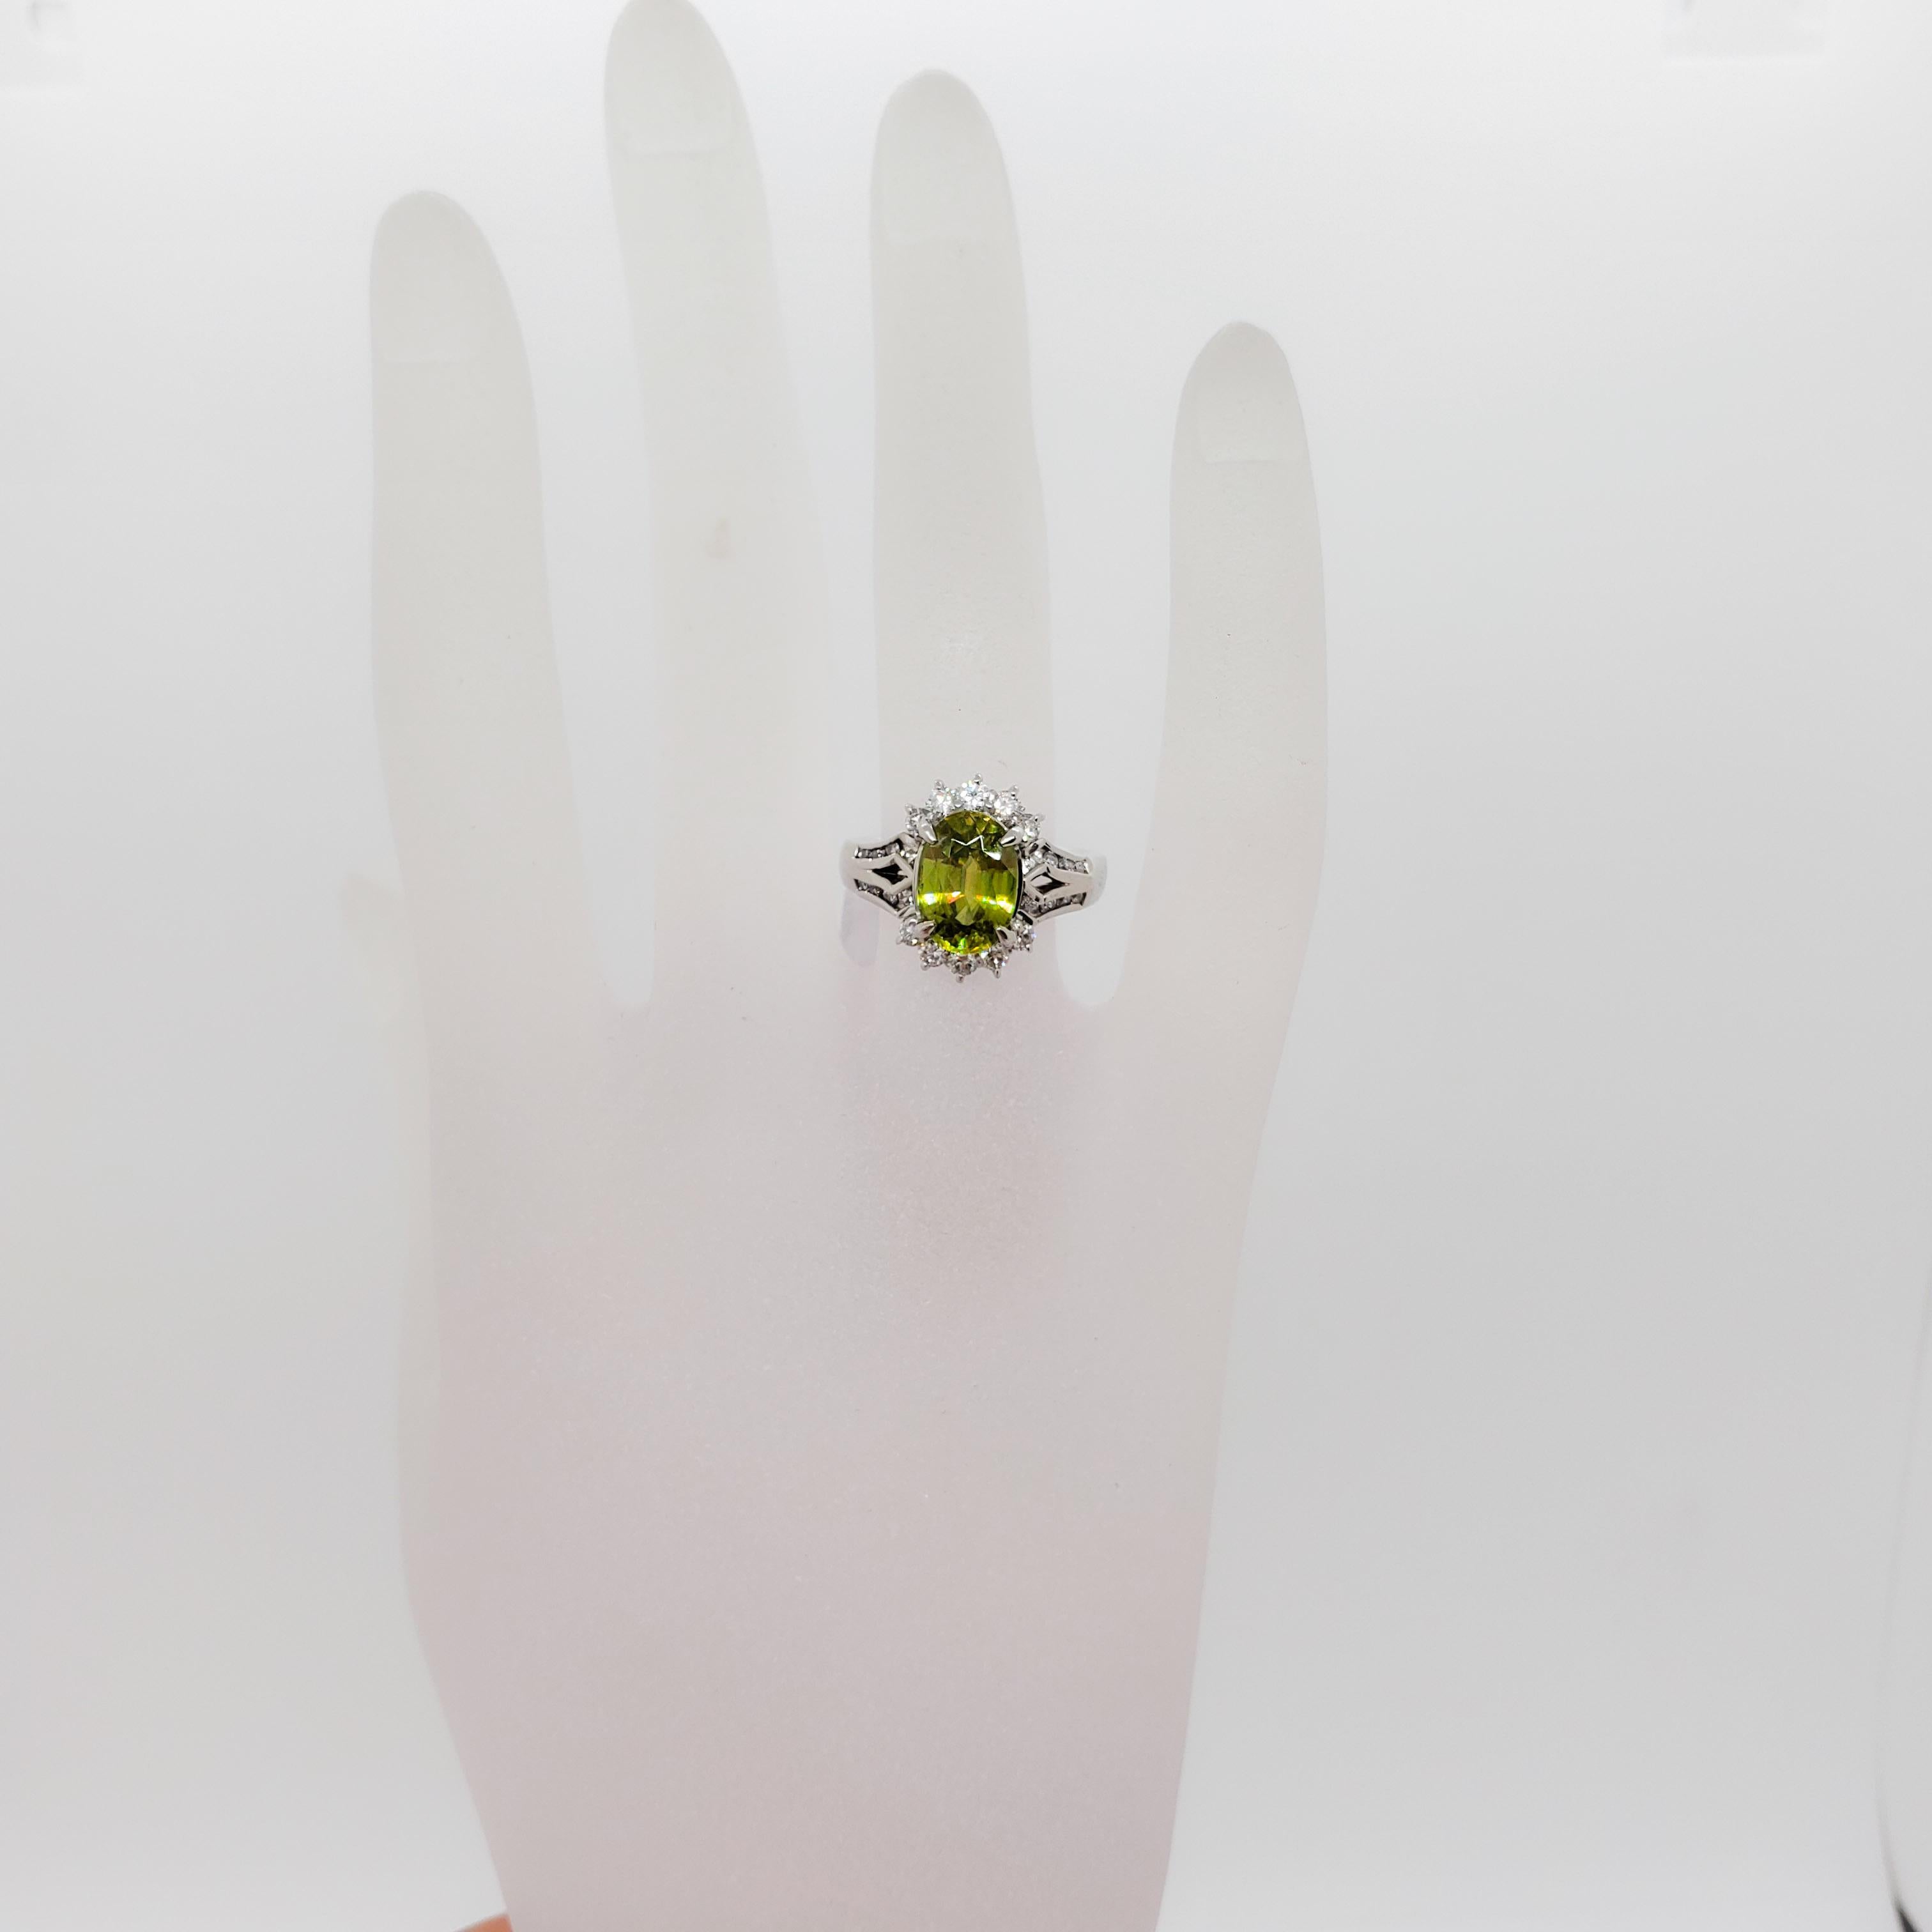 Stunning green sphene oval weighing 2.88 ct. with 0.64 ct. of good quality white diamond rounds.  Handmade platinum mounting in ring size 6.5.  Beautiful classic design that can be worn everyday or for a special occasion.  Mint condition.